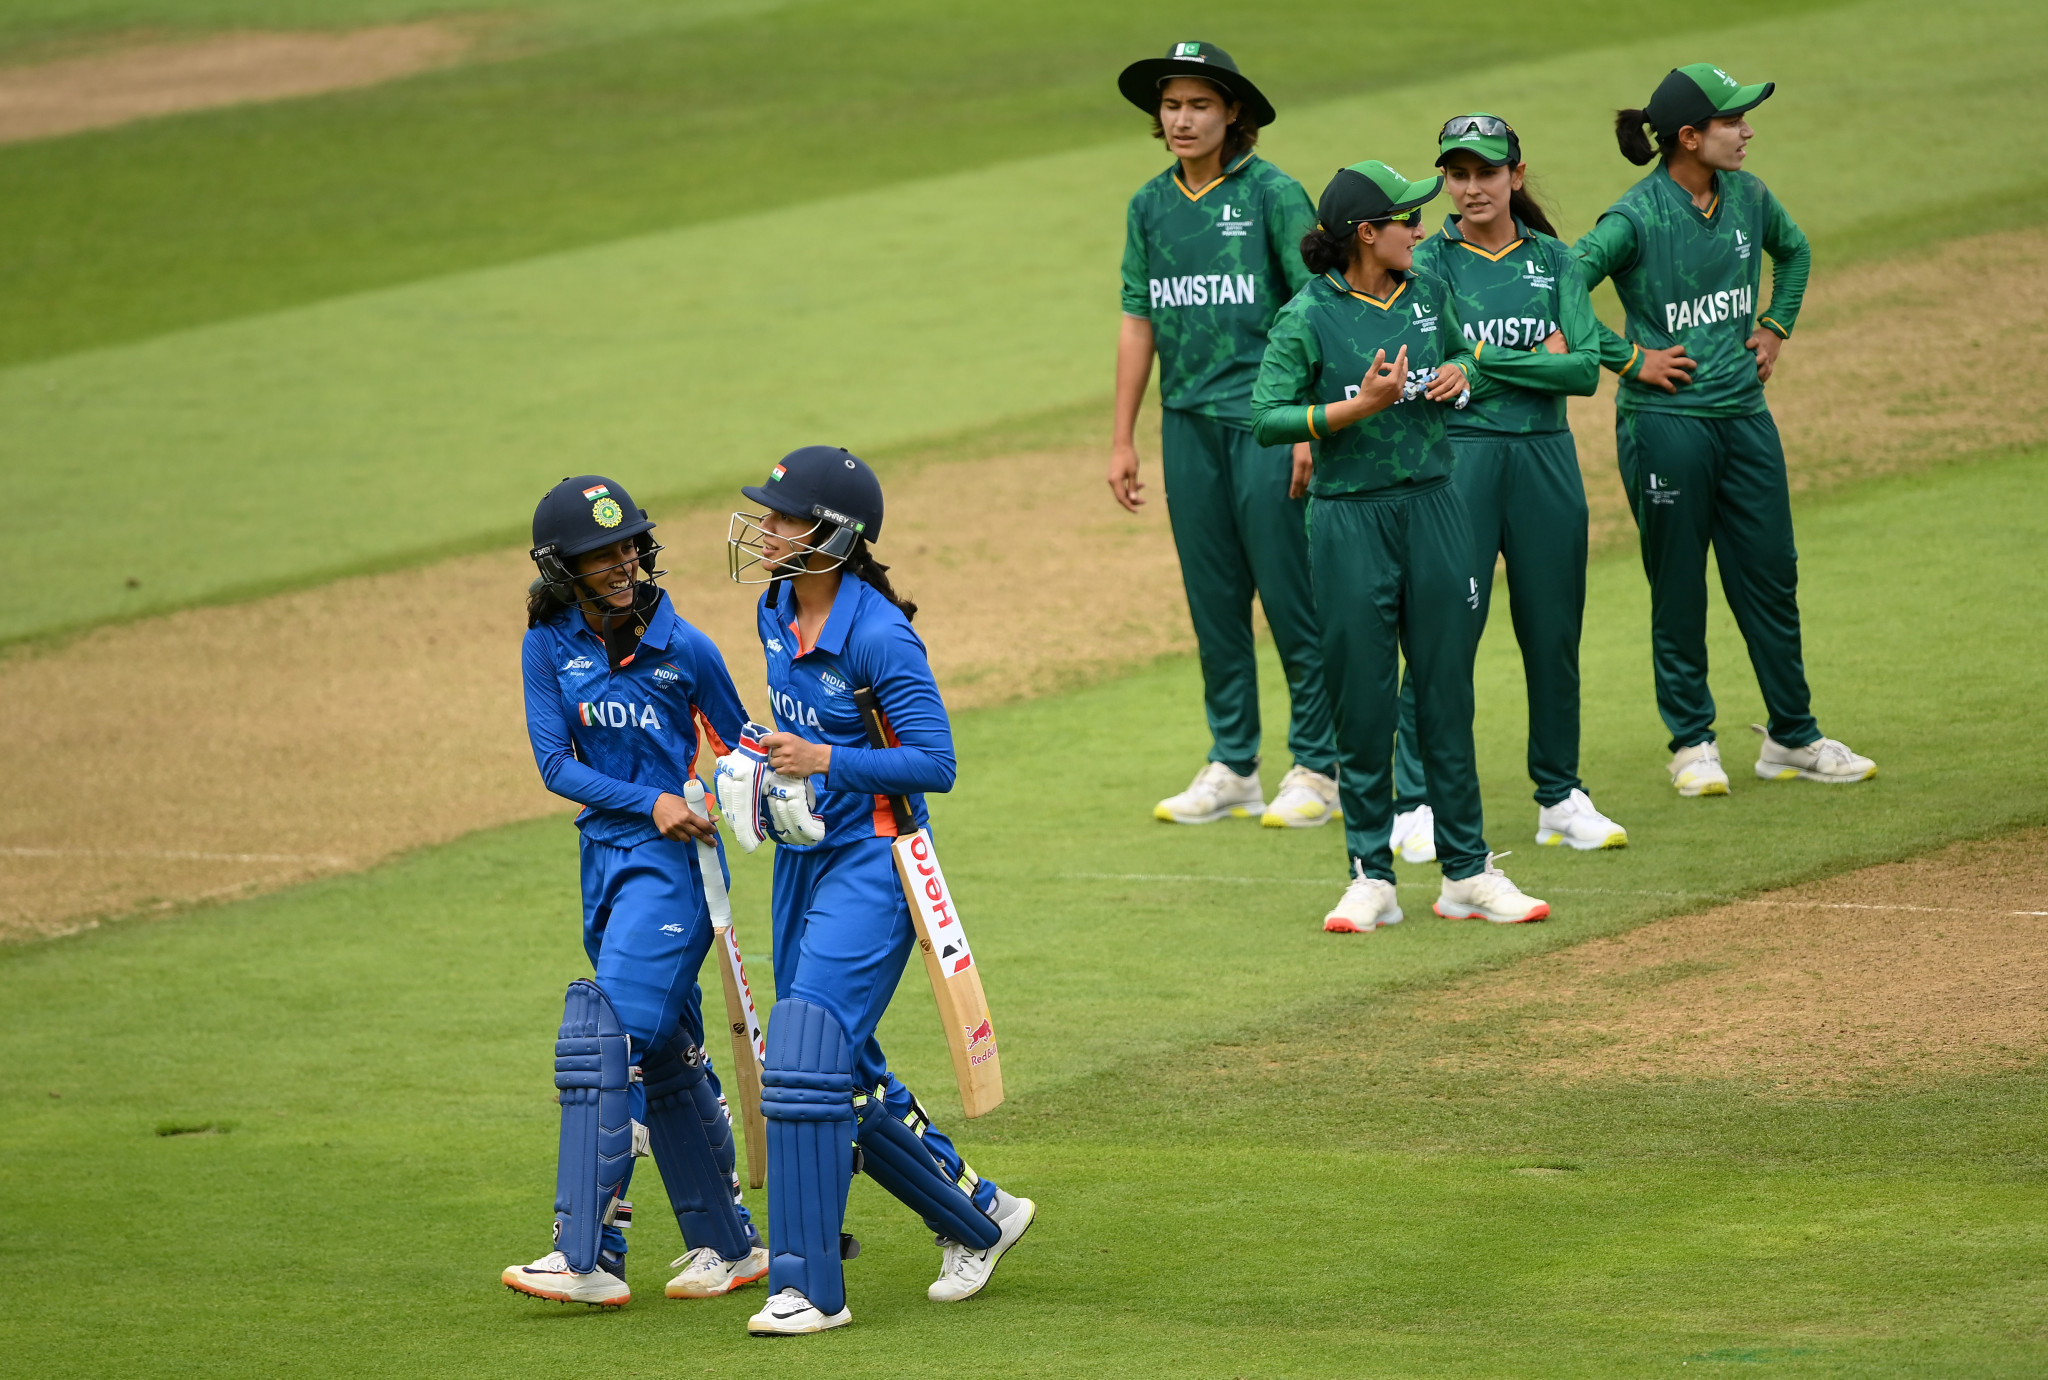 An unbeaten 63 from Smriti Mandhana helped India to an eight-wicket win over Pakistan ©Getty Images